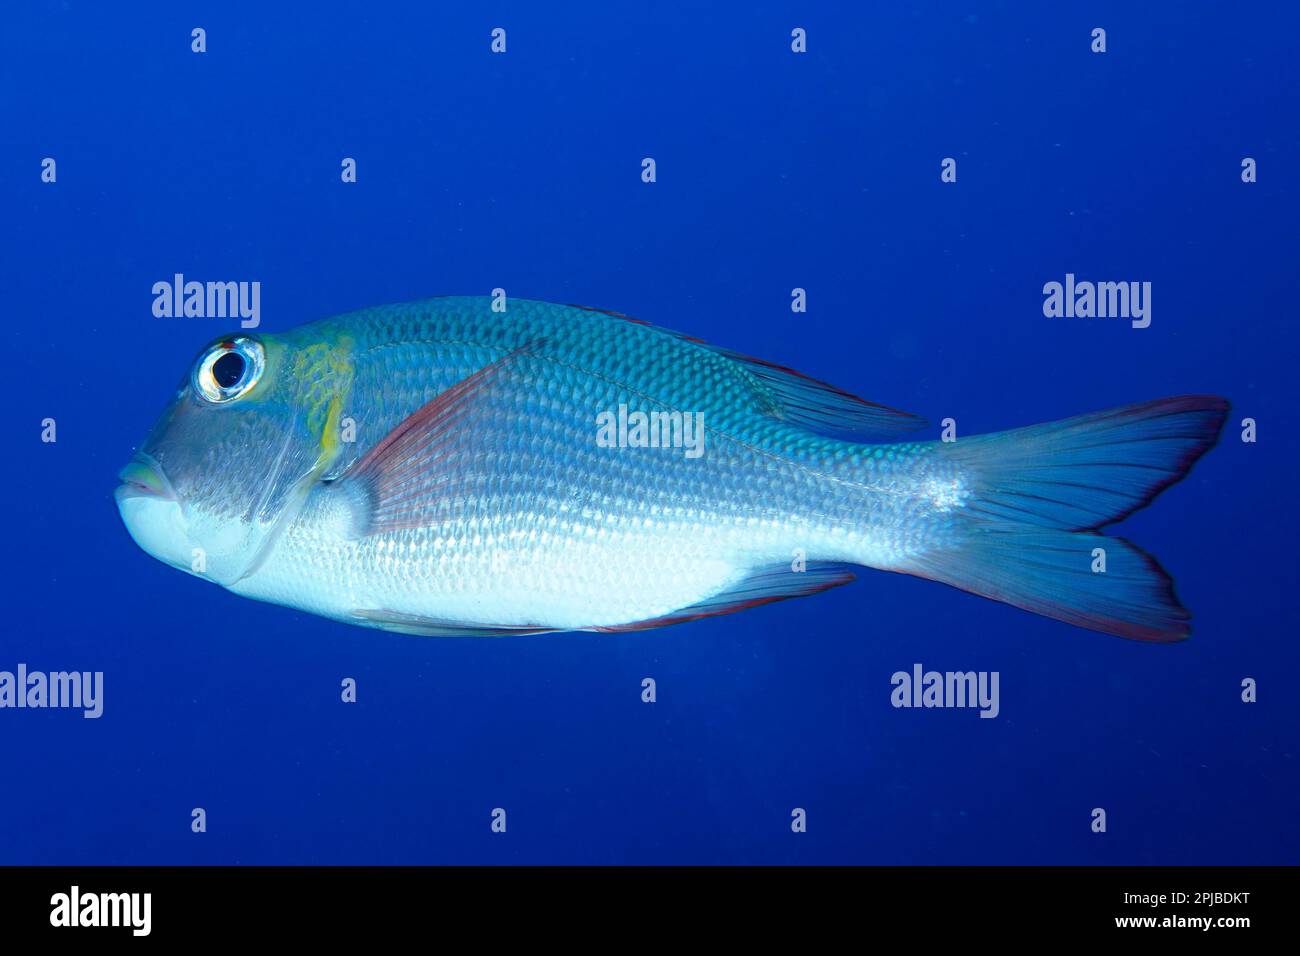 Humpnose big-eye bream (Monotaxis grandoculis) in front of a solid blue background, exempt. Dive site Daedalus Reef, Egypt, Red Sea Stock Photo